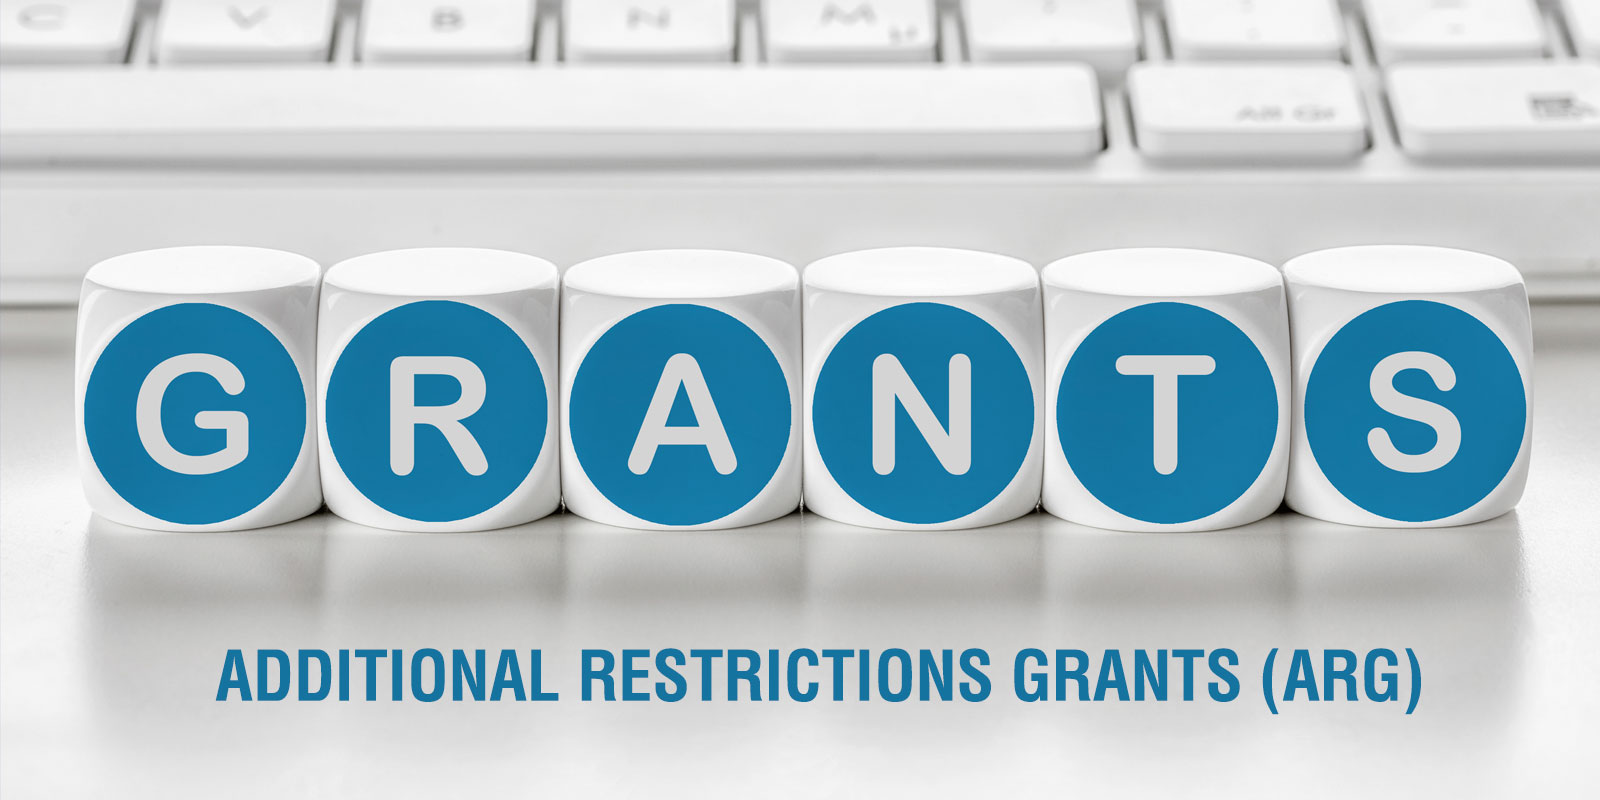 Additional Restrictions Grants (ARG)